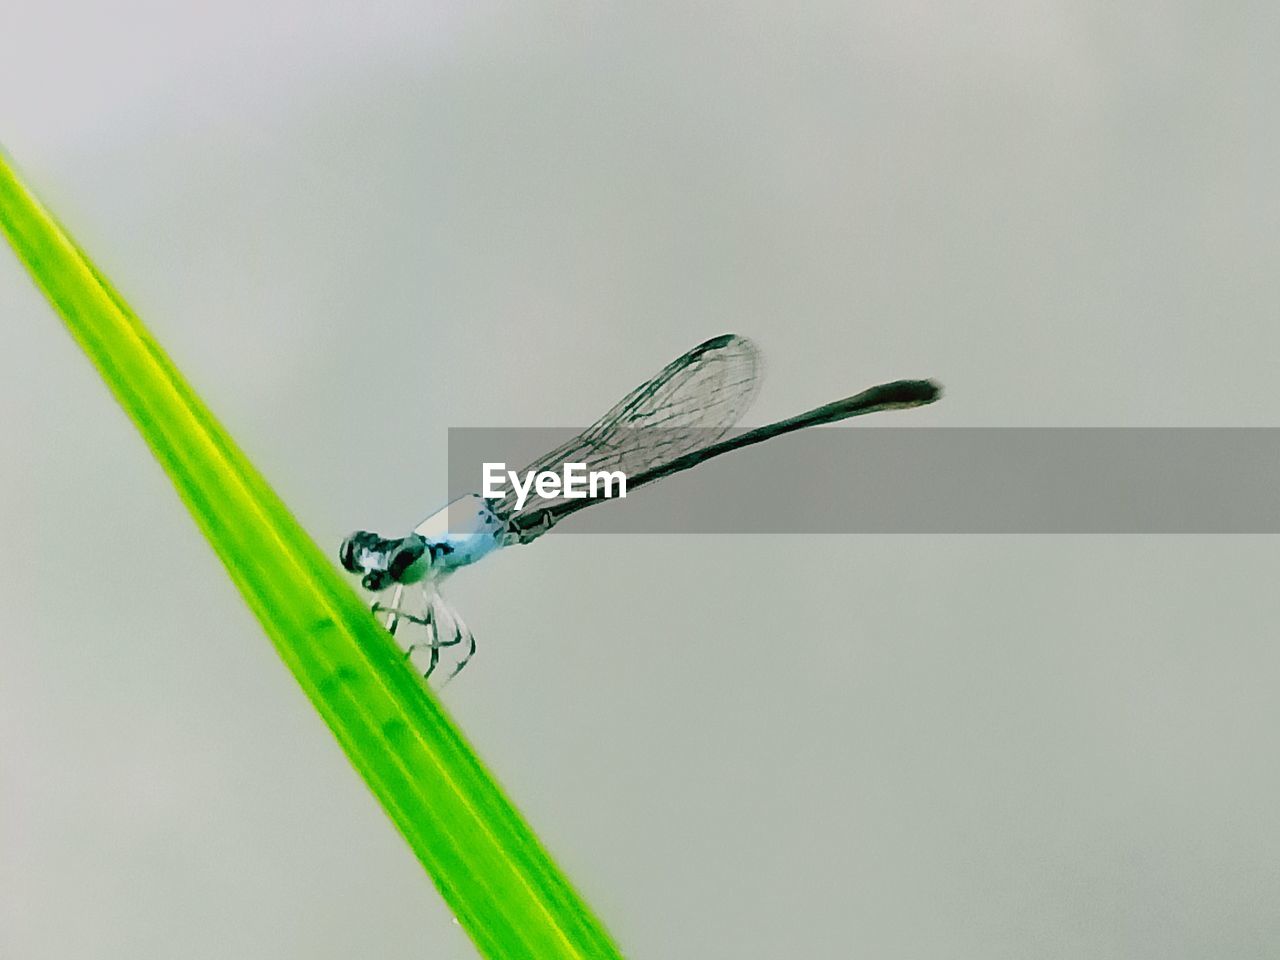 CLOSE-UP OF DRAGONFLY ON PLANT